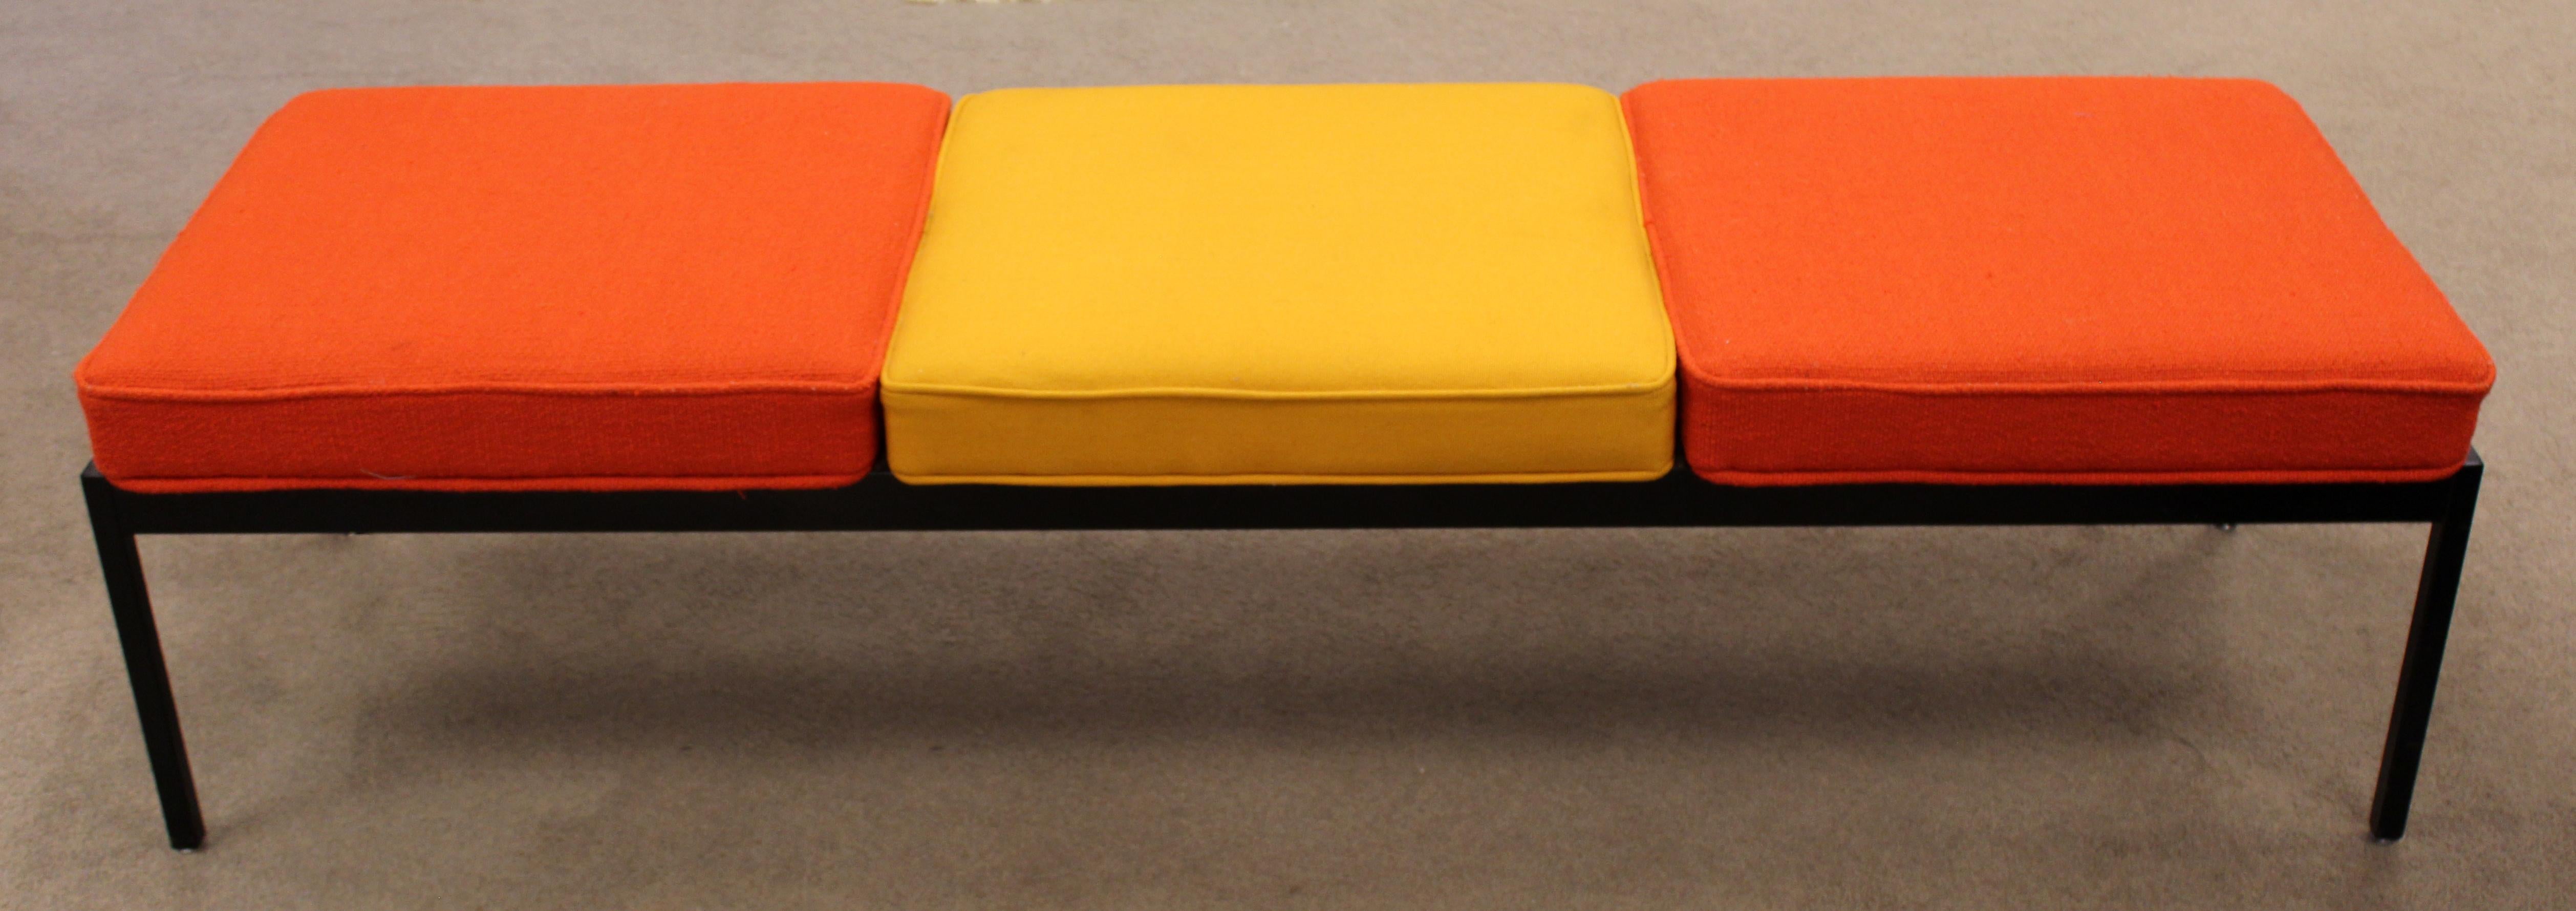 For your consideration is a vibrant, three seat bench, by Steelcase, circa 1960s, in the style of George Nelson. In excellent vintage condition. The dimensions are 70